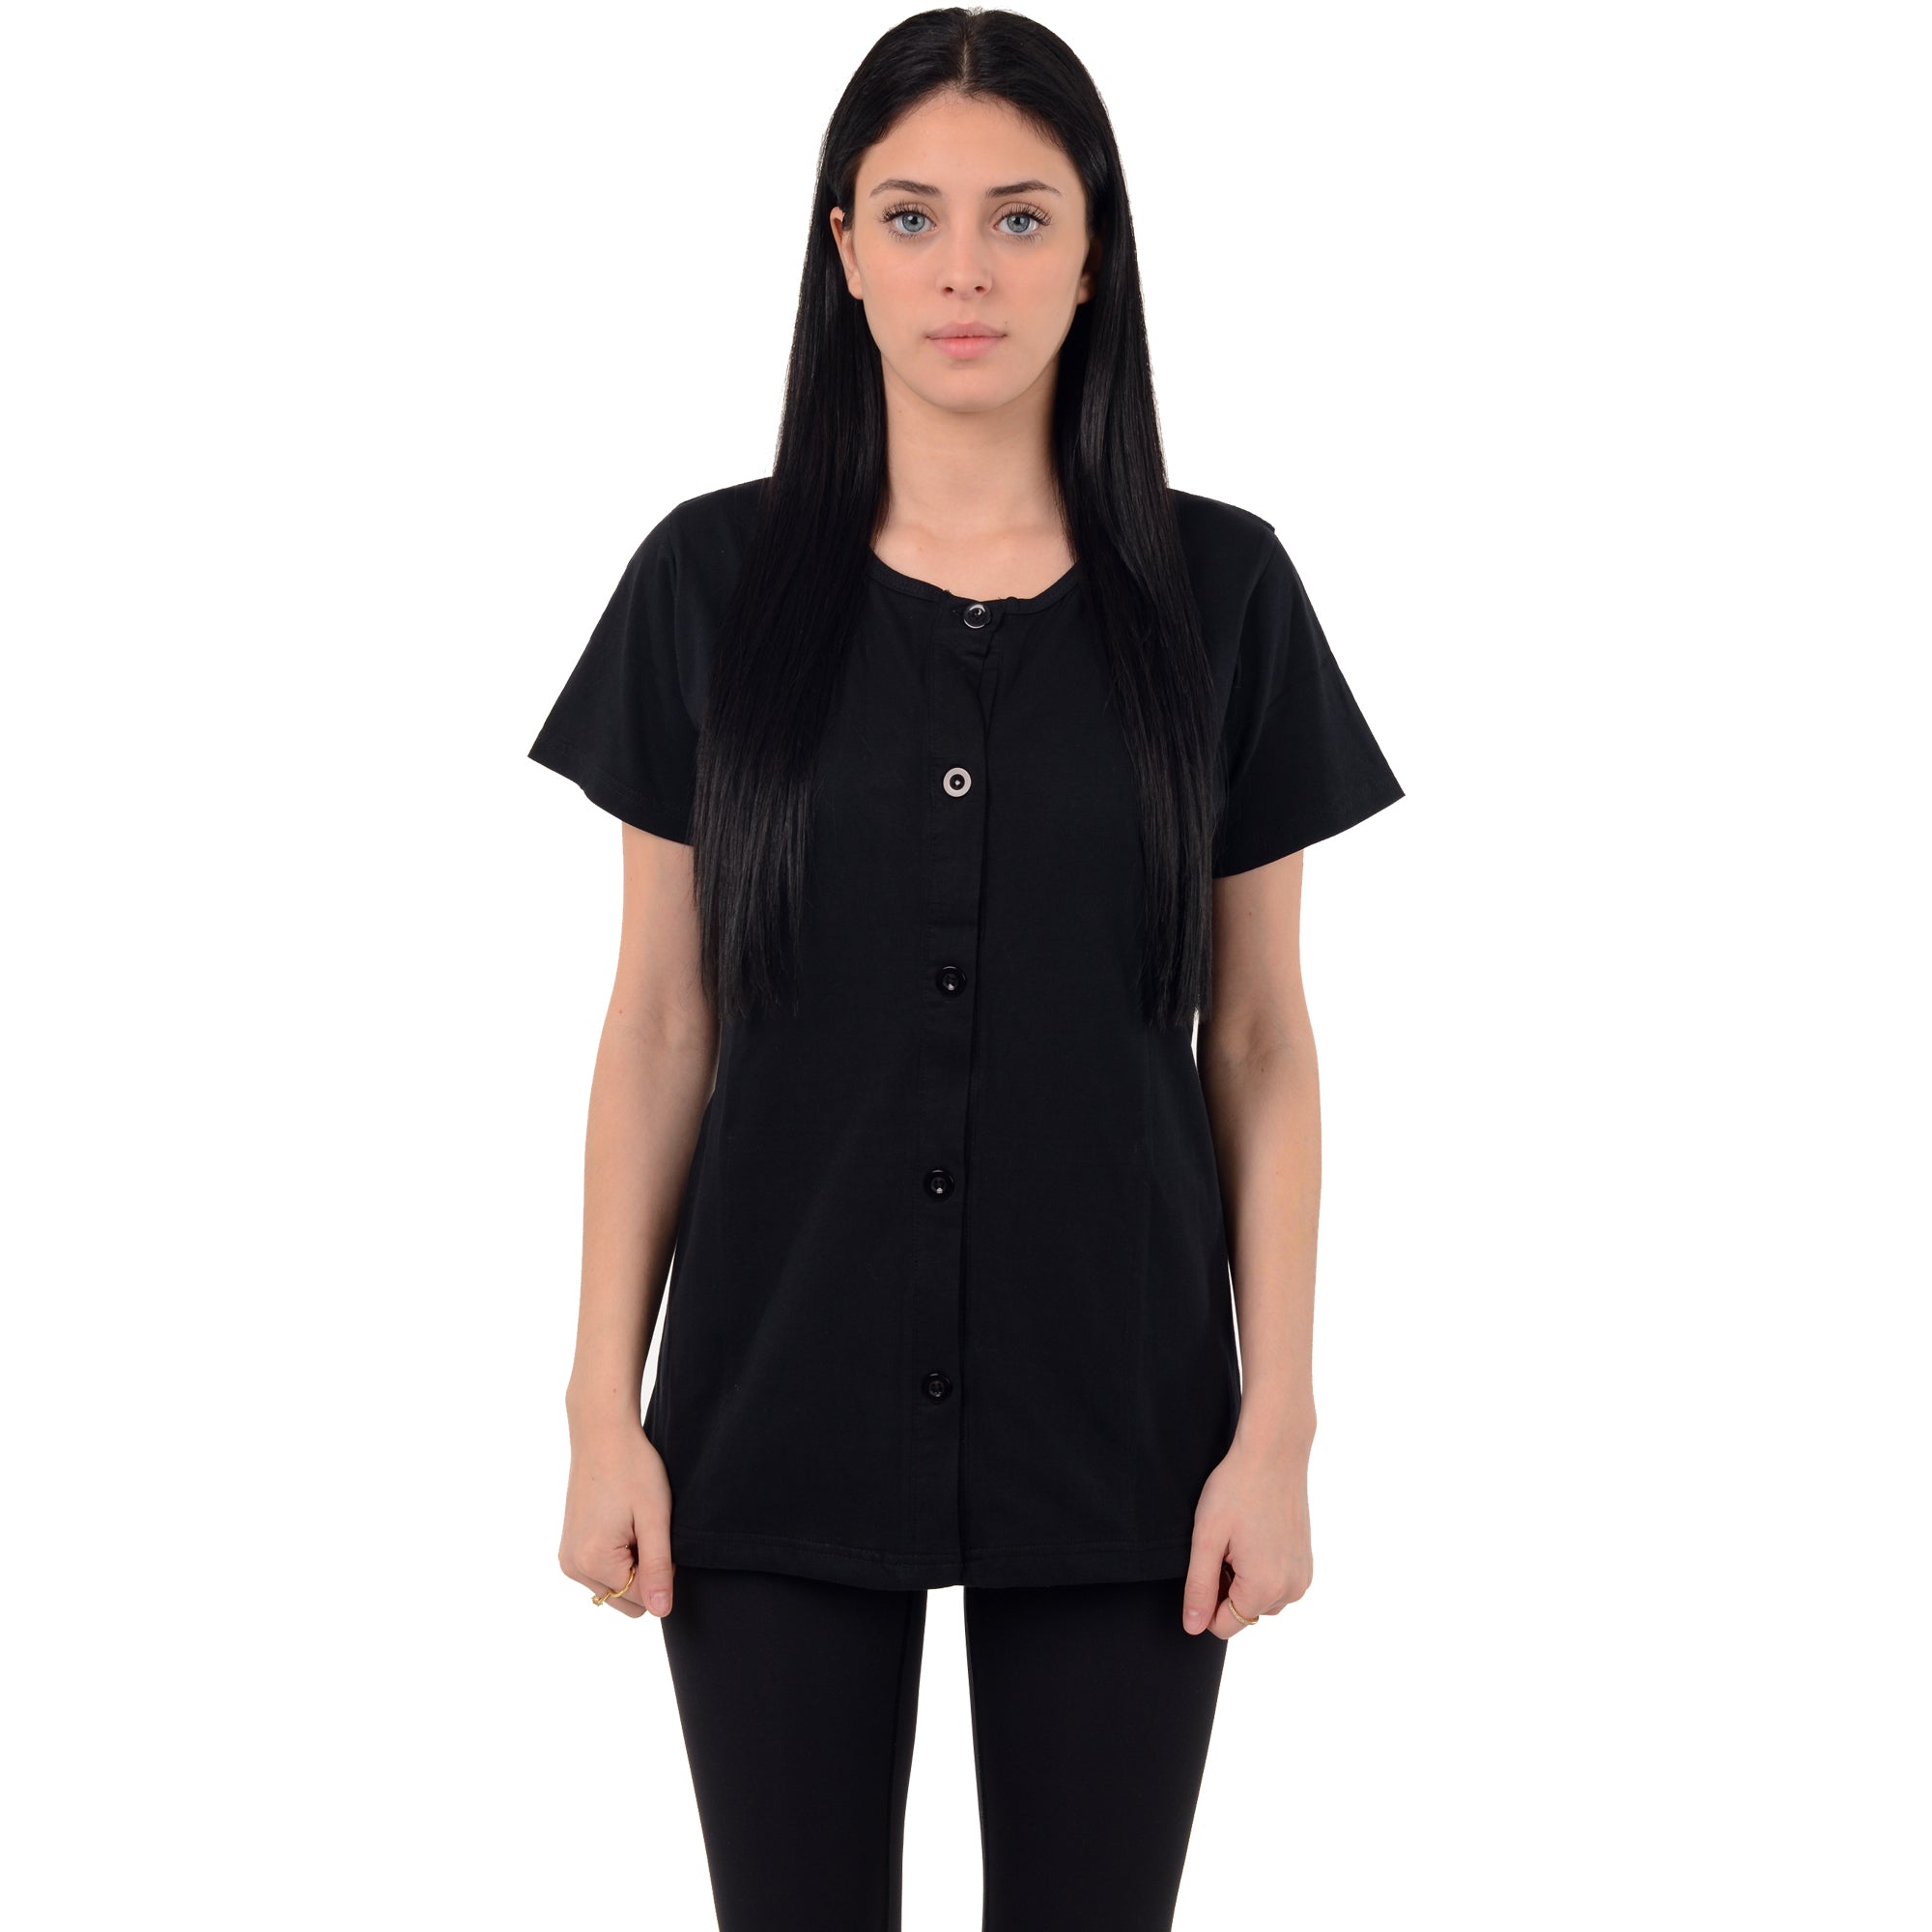 Post Mastectomy Surgery Recovery Shirt Lapel Collar Camisole With Drain  Pockets